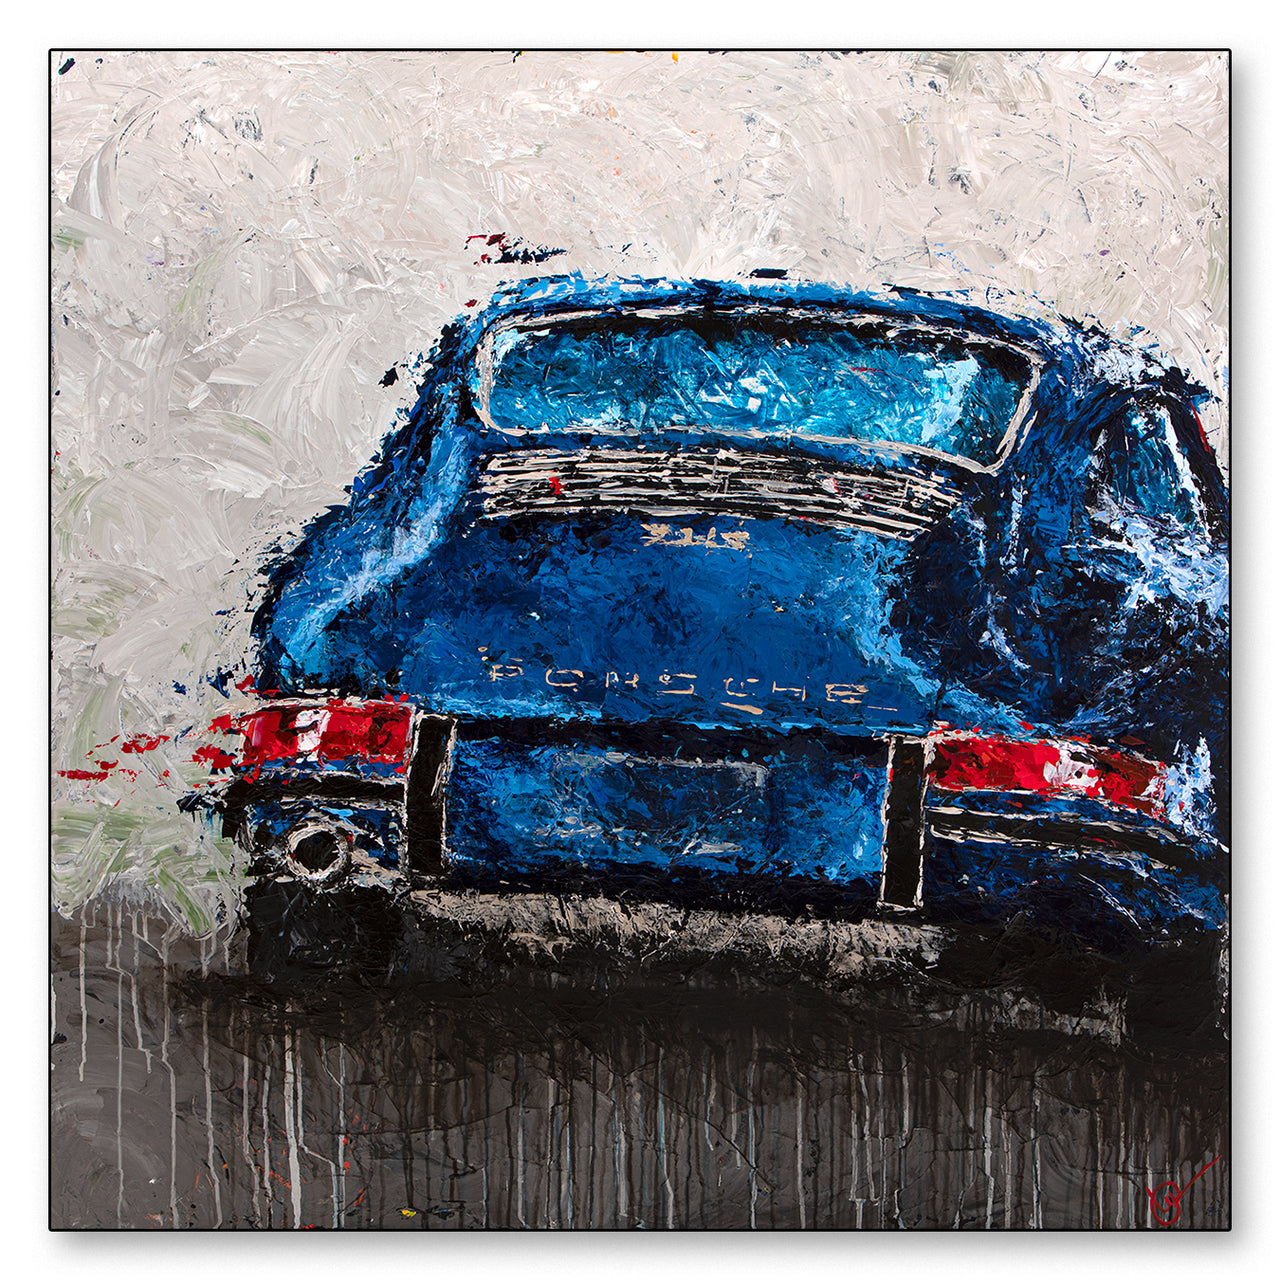 Abstracted Air 3 - 1967 911S